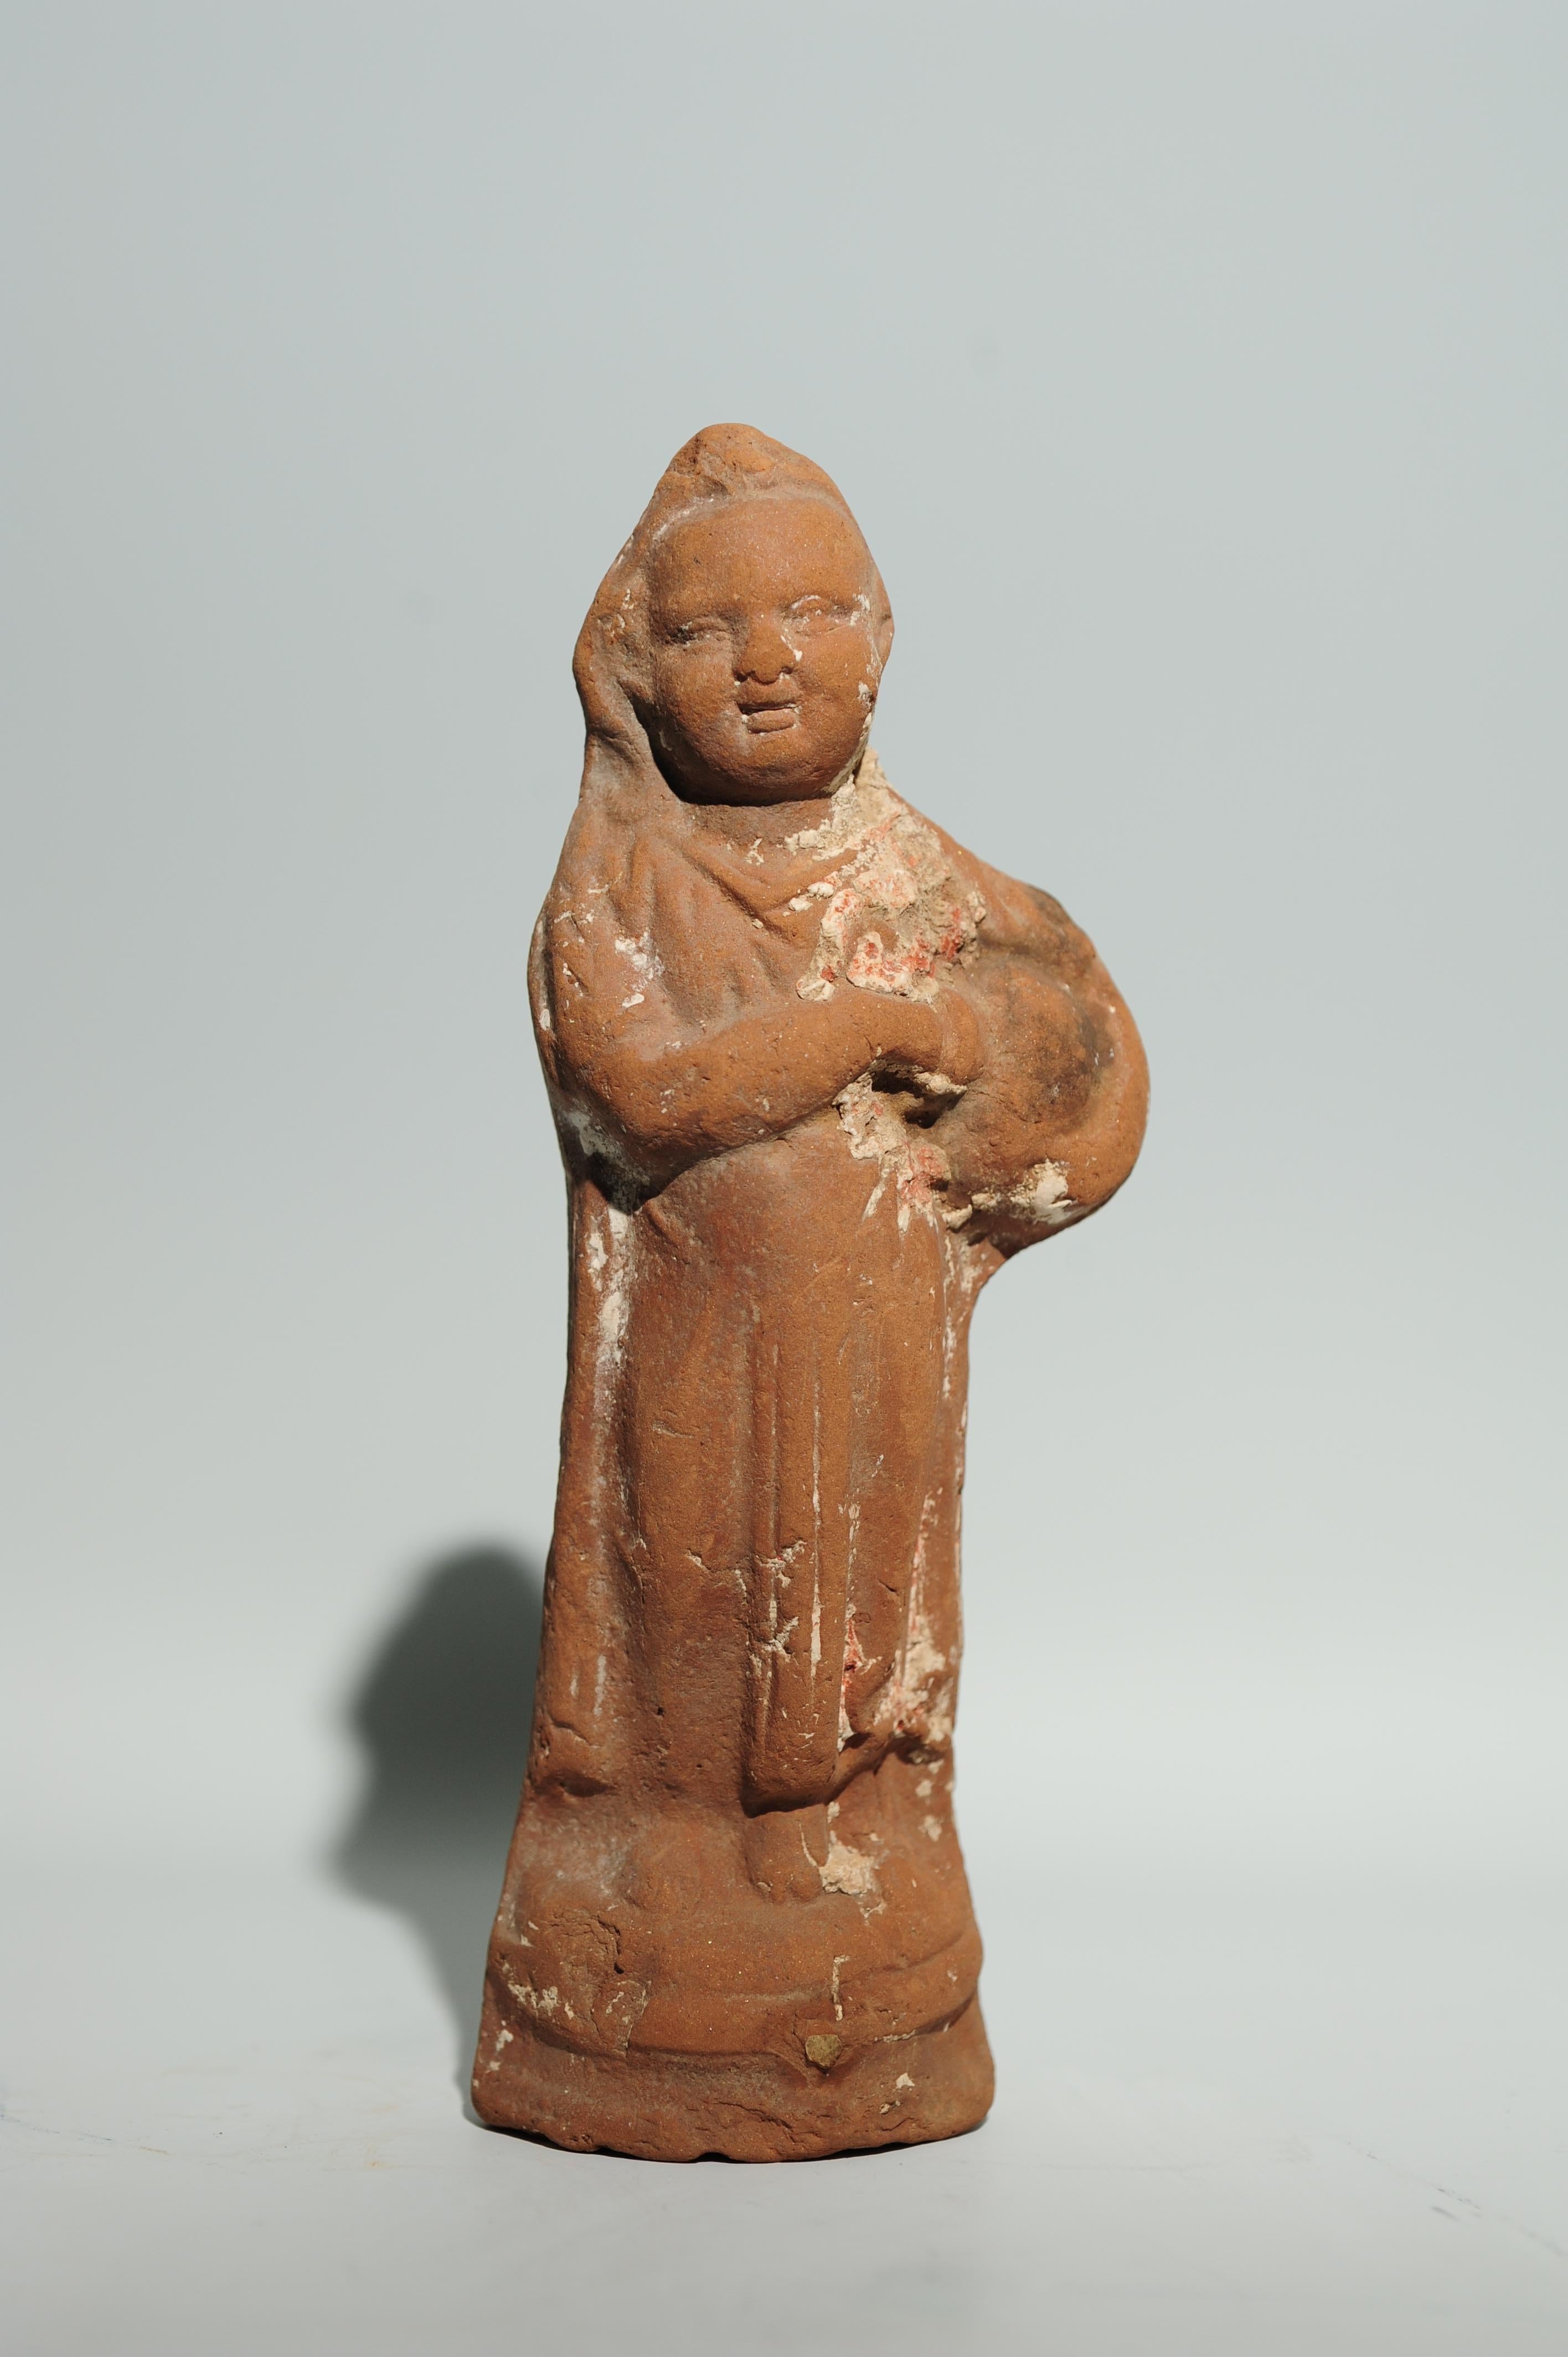 Terracotta statuette of Harpocrates with pot

Molded. The standing Harpocrates is holding a tilted clay pot with his left arm while his right hand is taking effect as if he wants to disperse its content; probably seeds. These terracotta clay figures